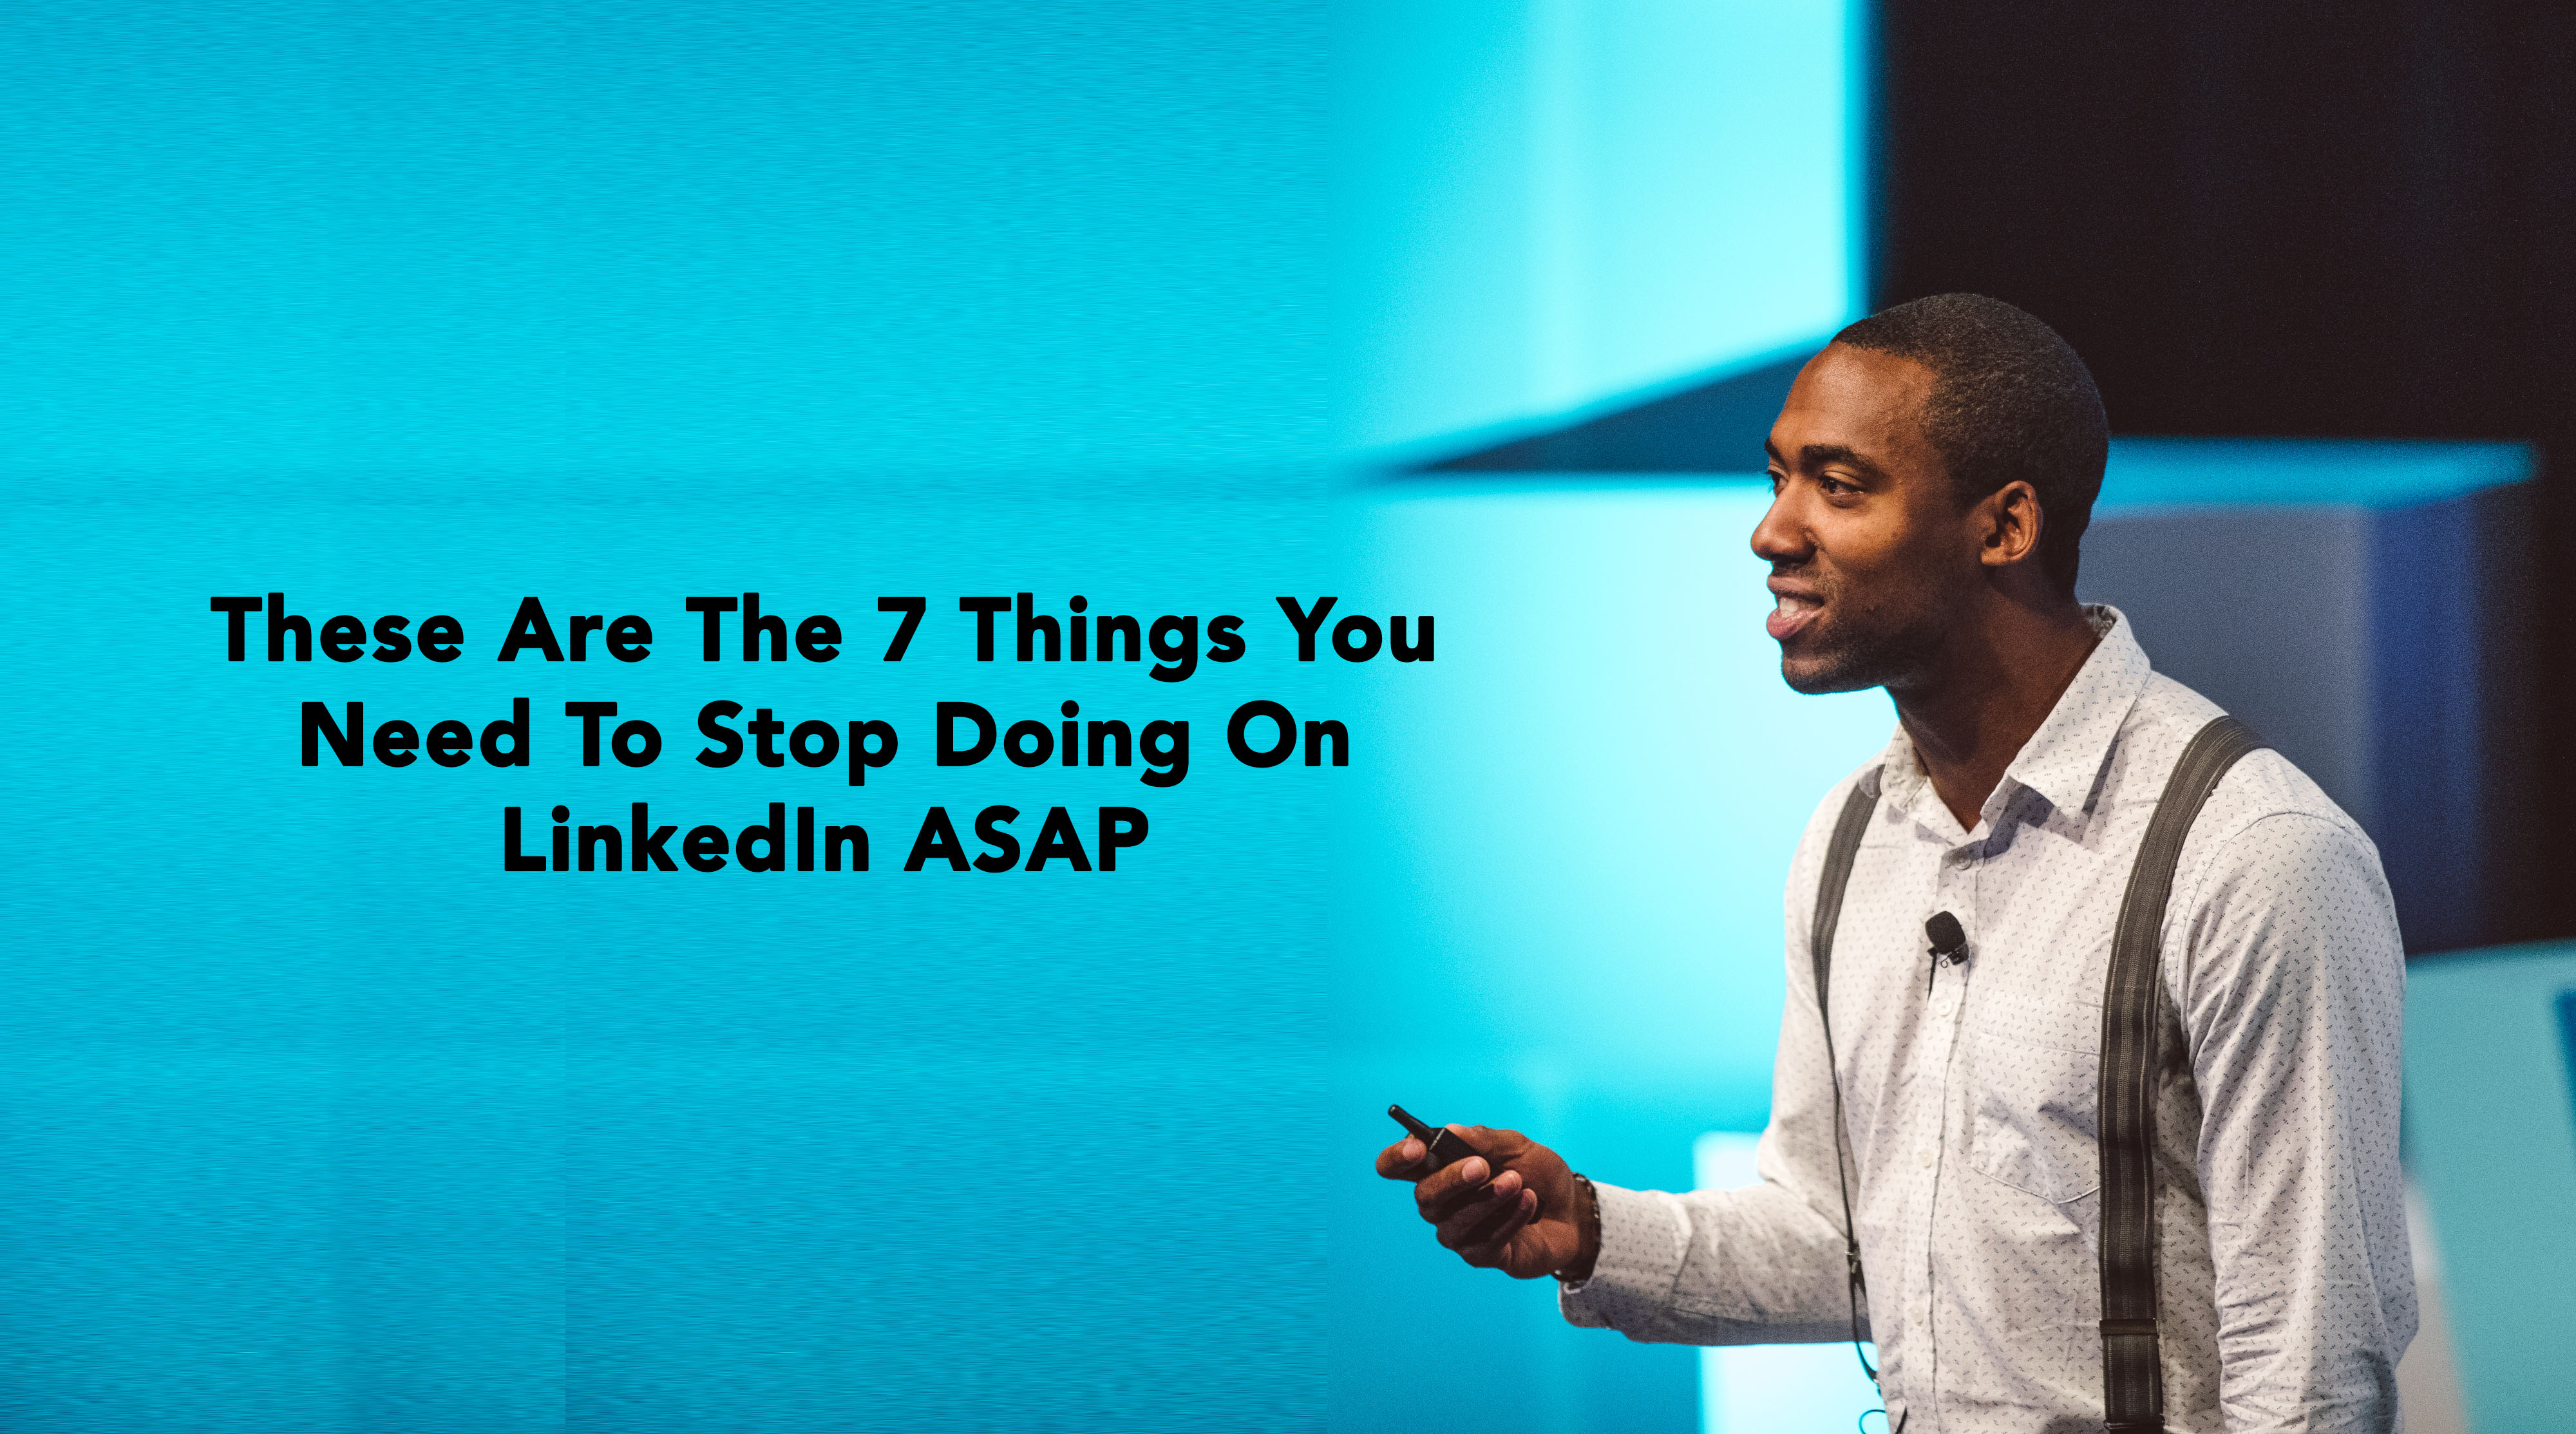 These Are The 7 Things You Need To Stop Doing On LinkedIn ASAP